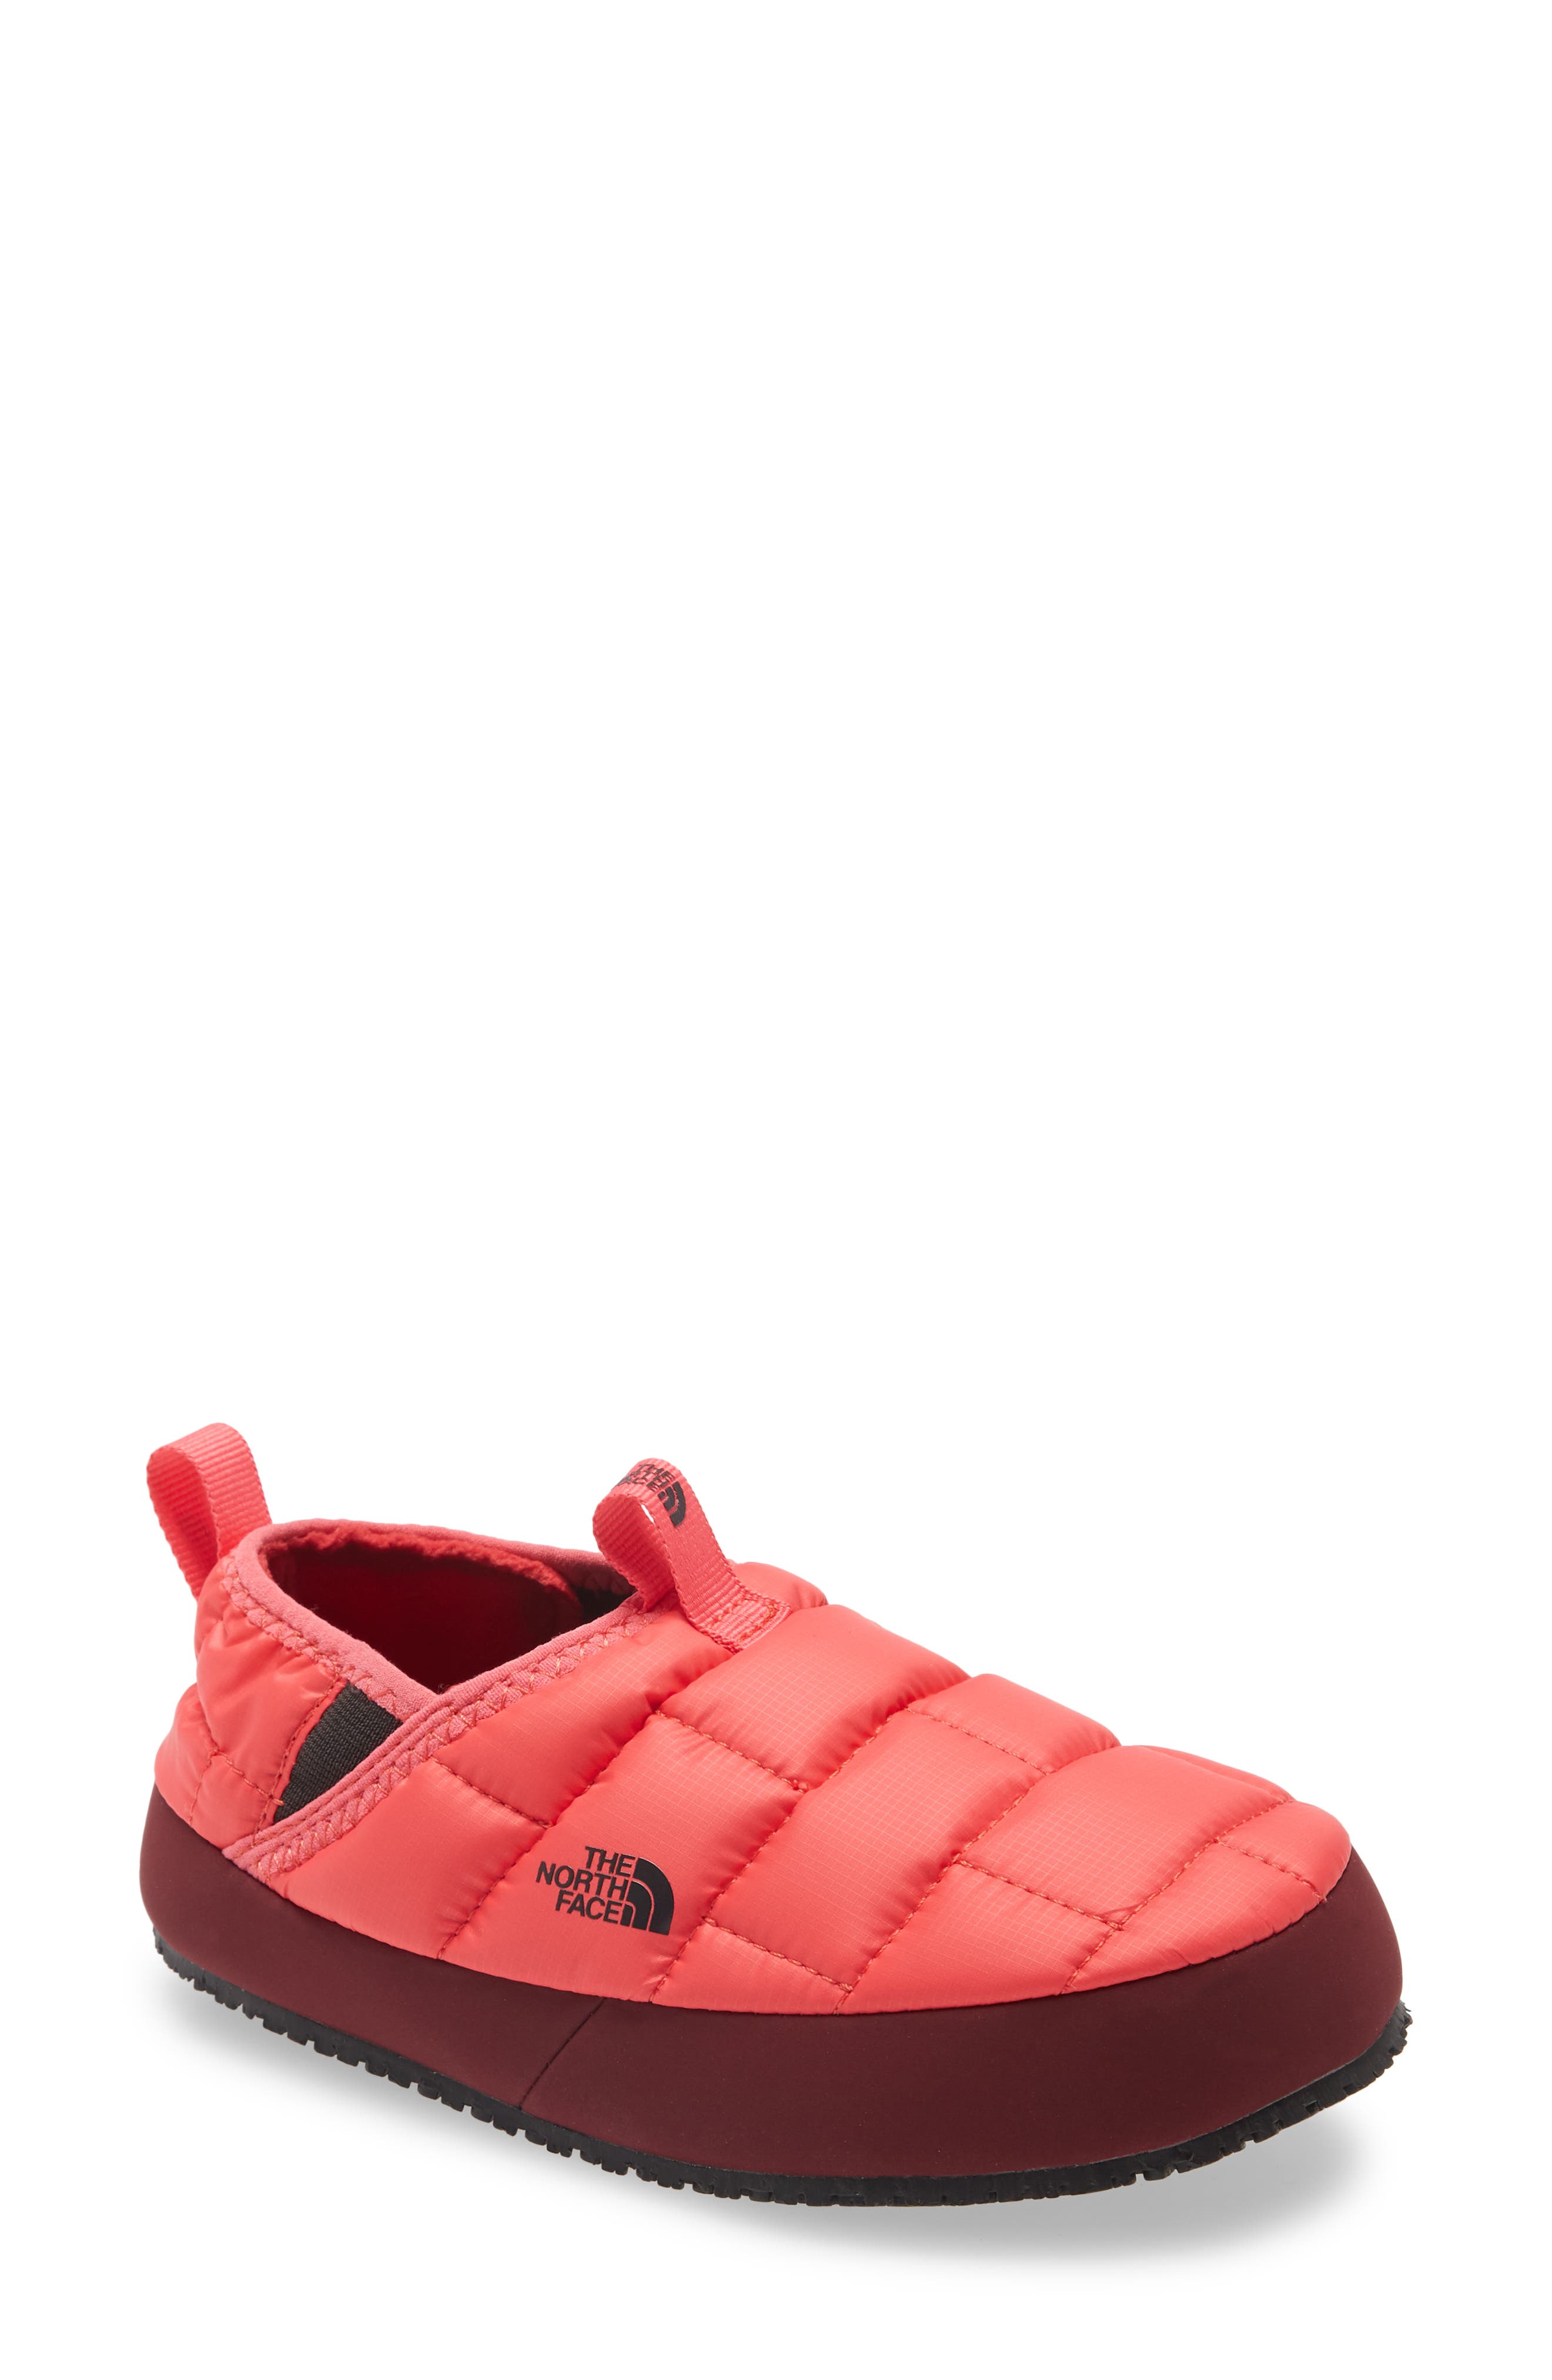 the north face toddler shoes